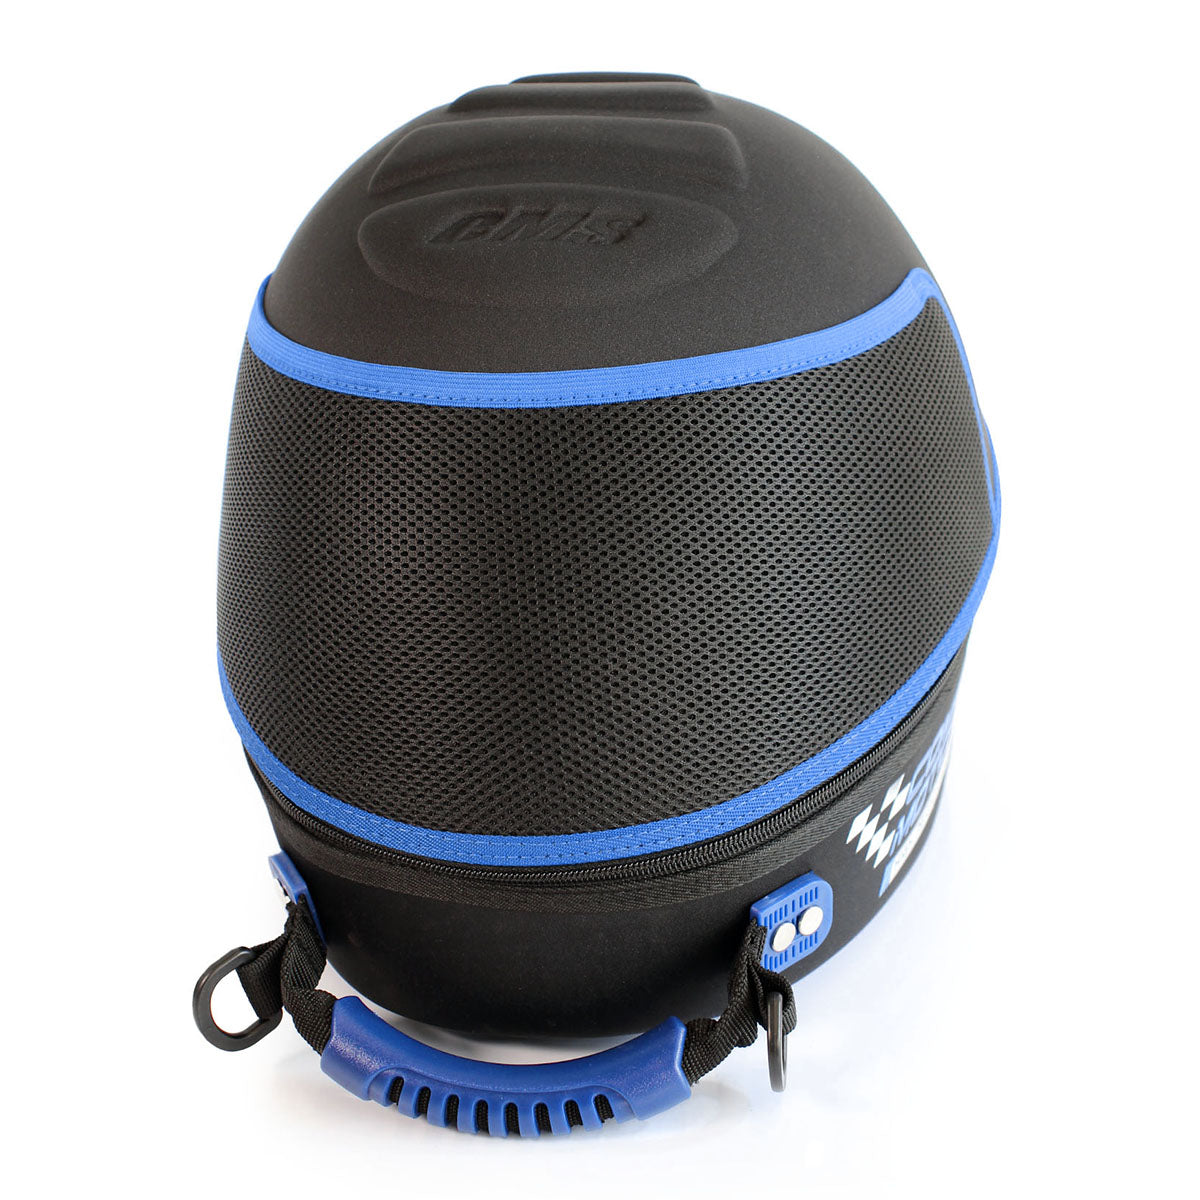 "CMS Performance Helmet Bag - Top Choice for Motorsport Enthusiasts"